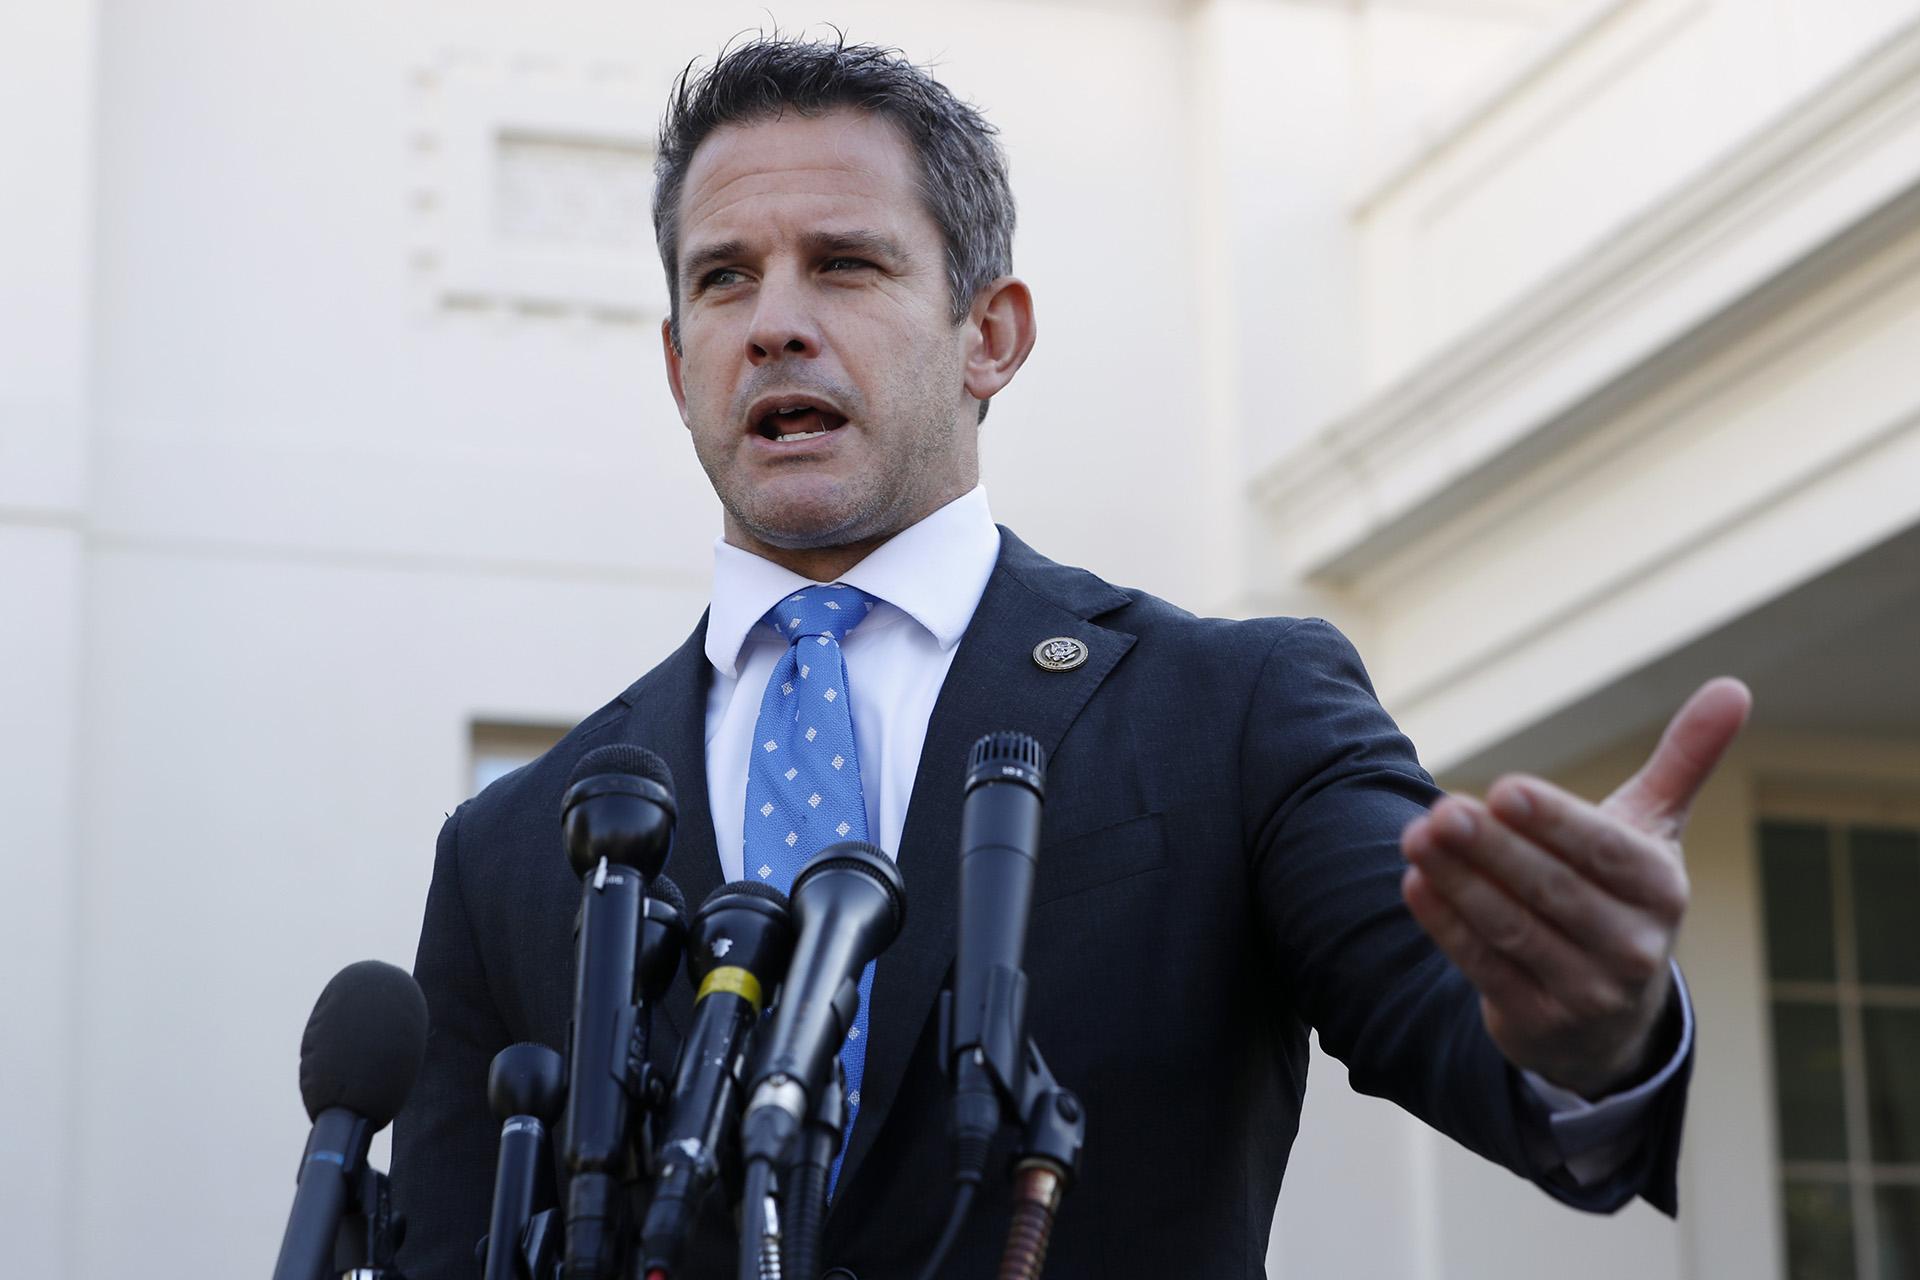 Rep. Adam Kinzinger, R-Ill., speaks to the media on Wednesday, March 6, 2019, at the White House in Washington. (AP Photo / Jacquelyn Martin)